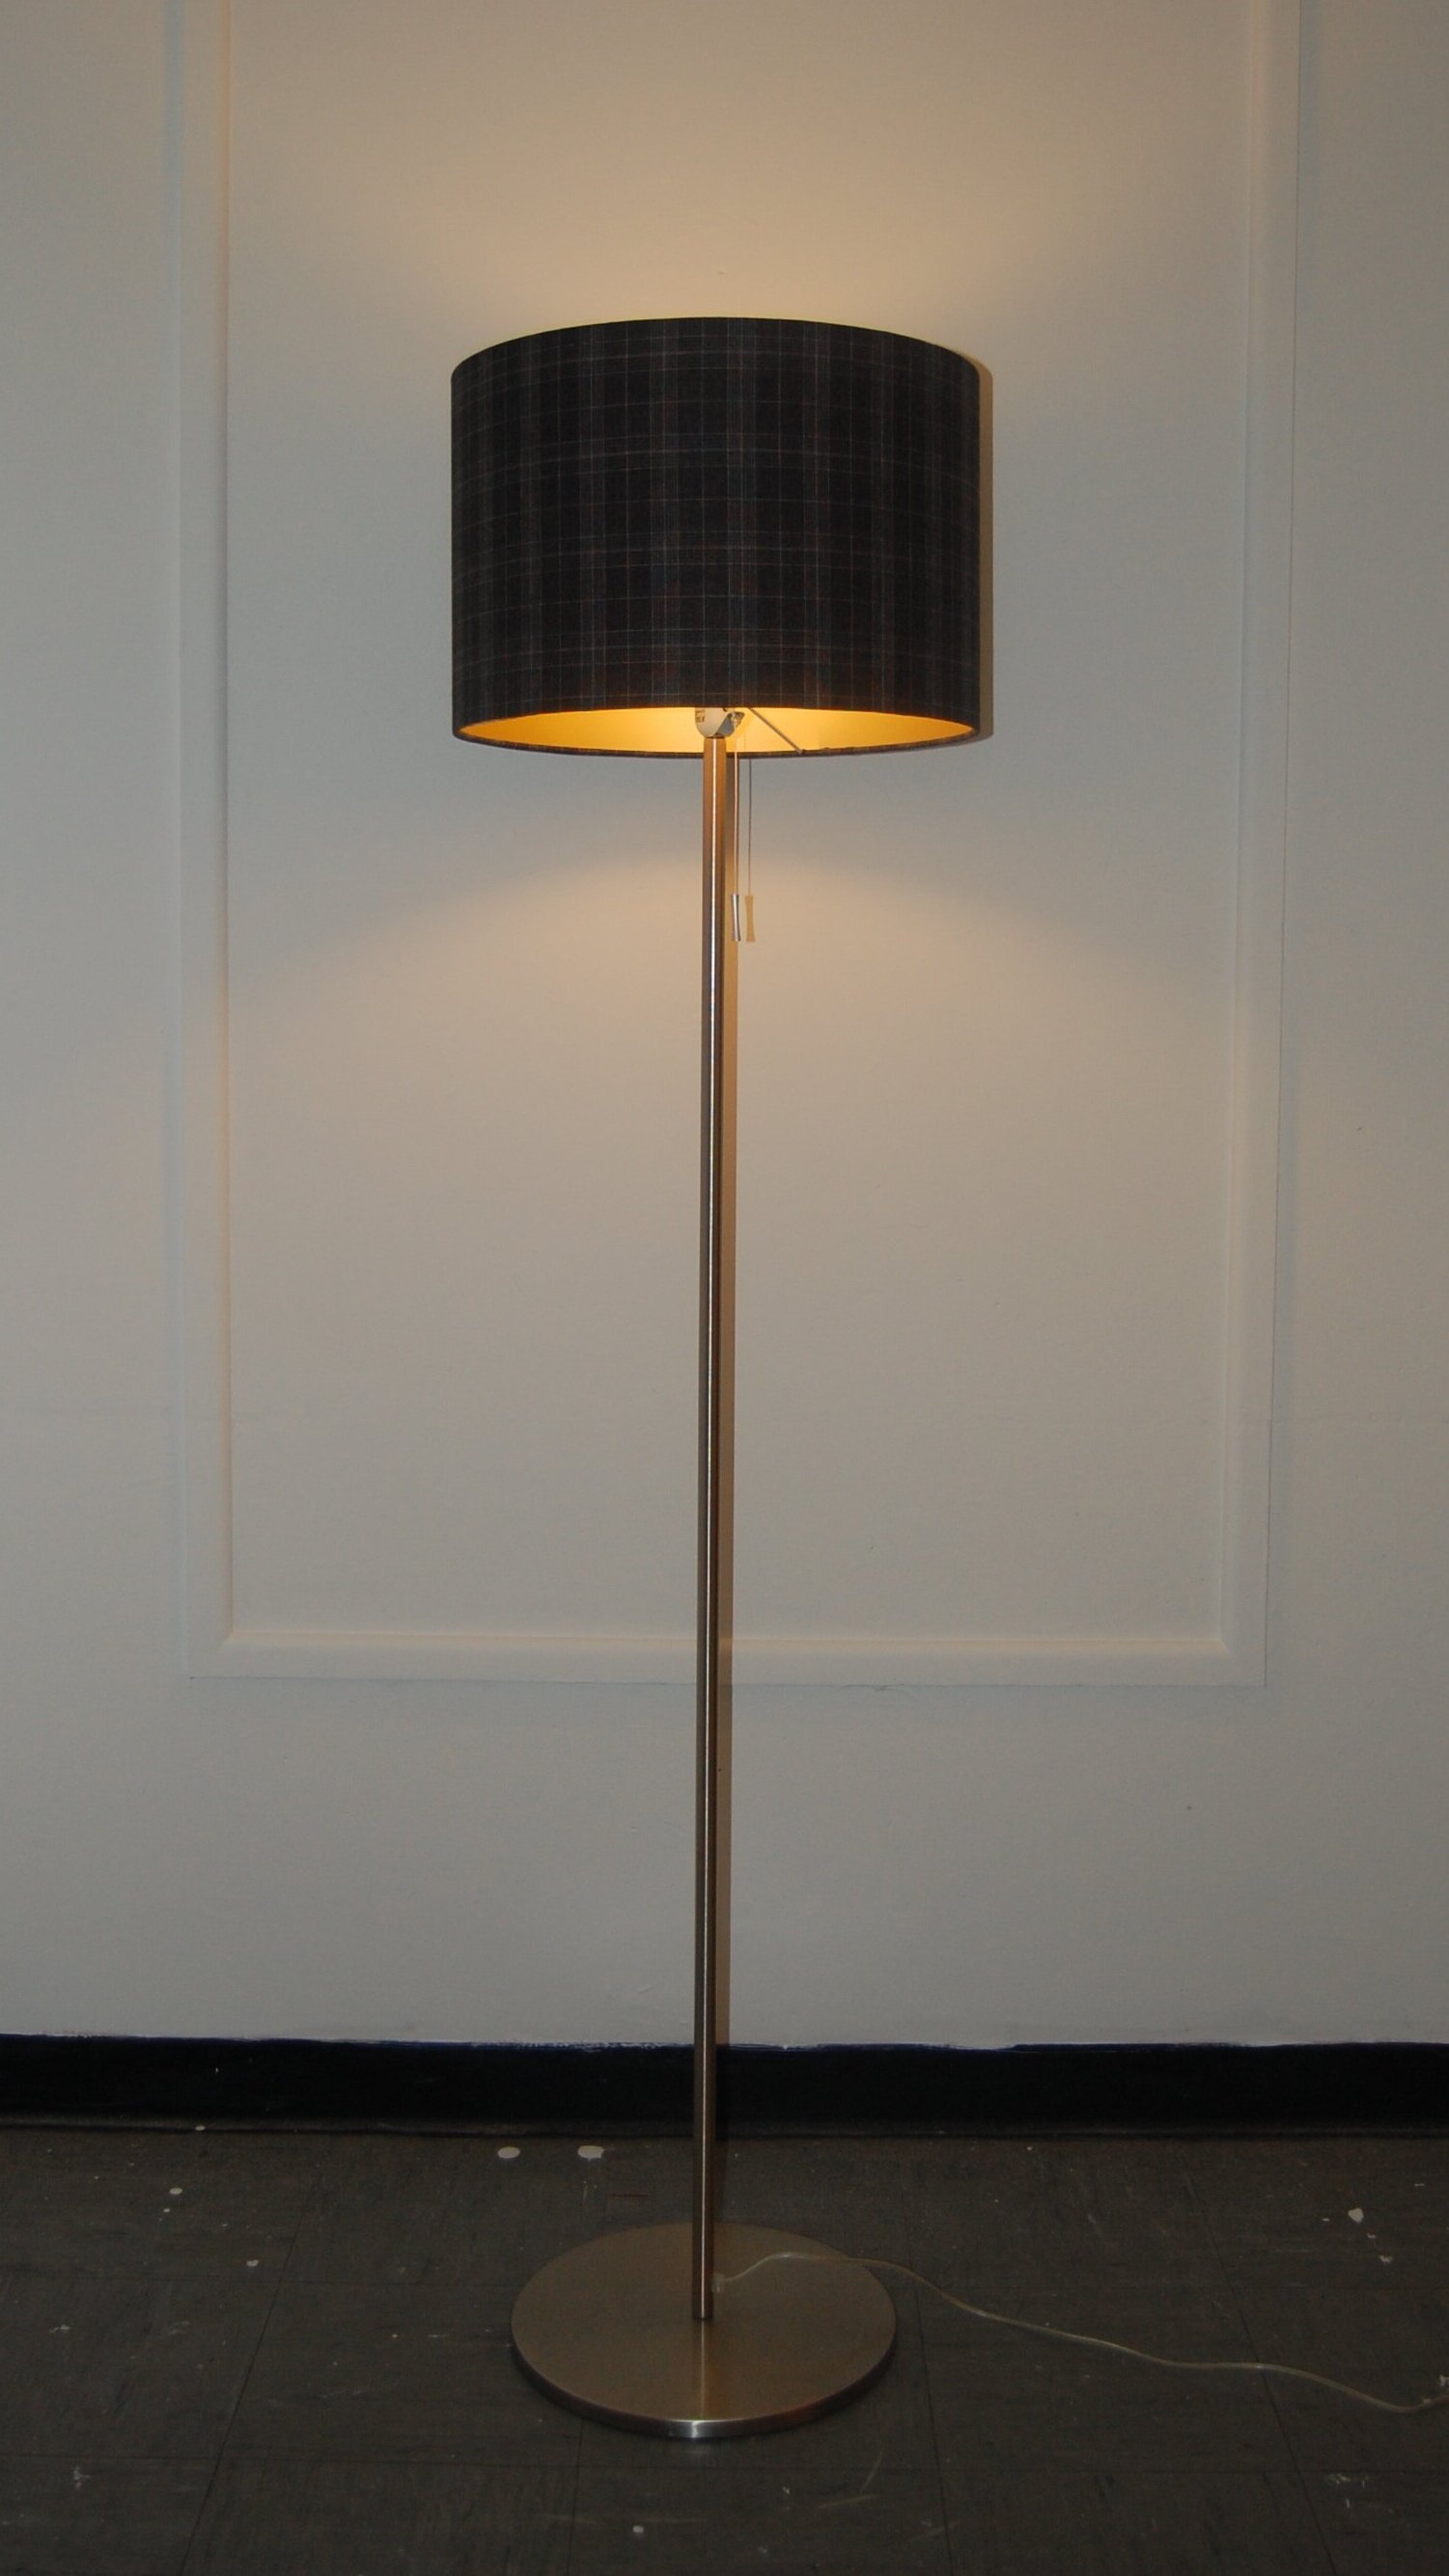 Bespoke Floor Lamp Shades And Standard, How Big Should A Floor Lamp Shade Be